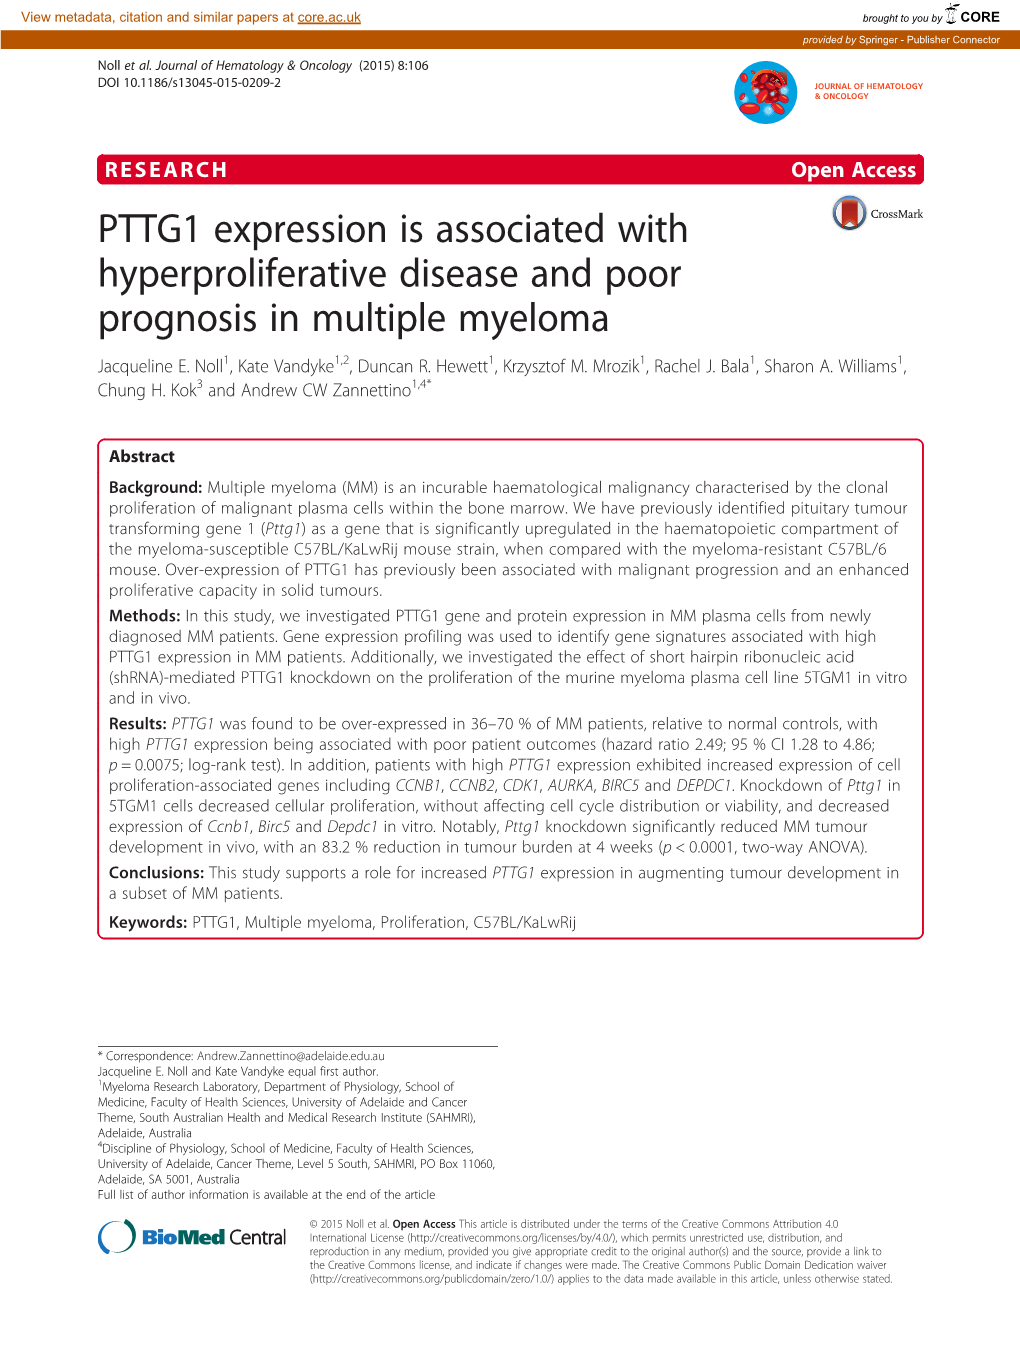 PTTG1 Expression Is Associated with Hyperproliferative Disease and Poor Prognosis in Multiple Myeloma Jacqueline E